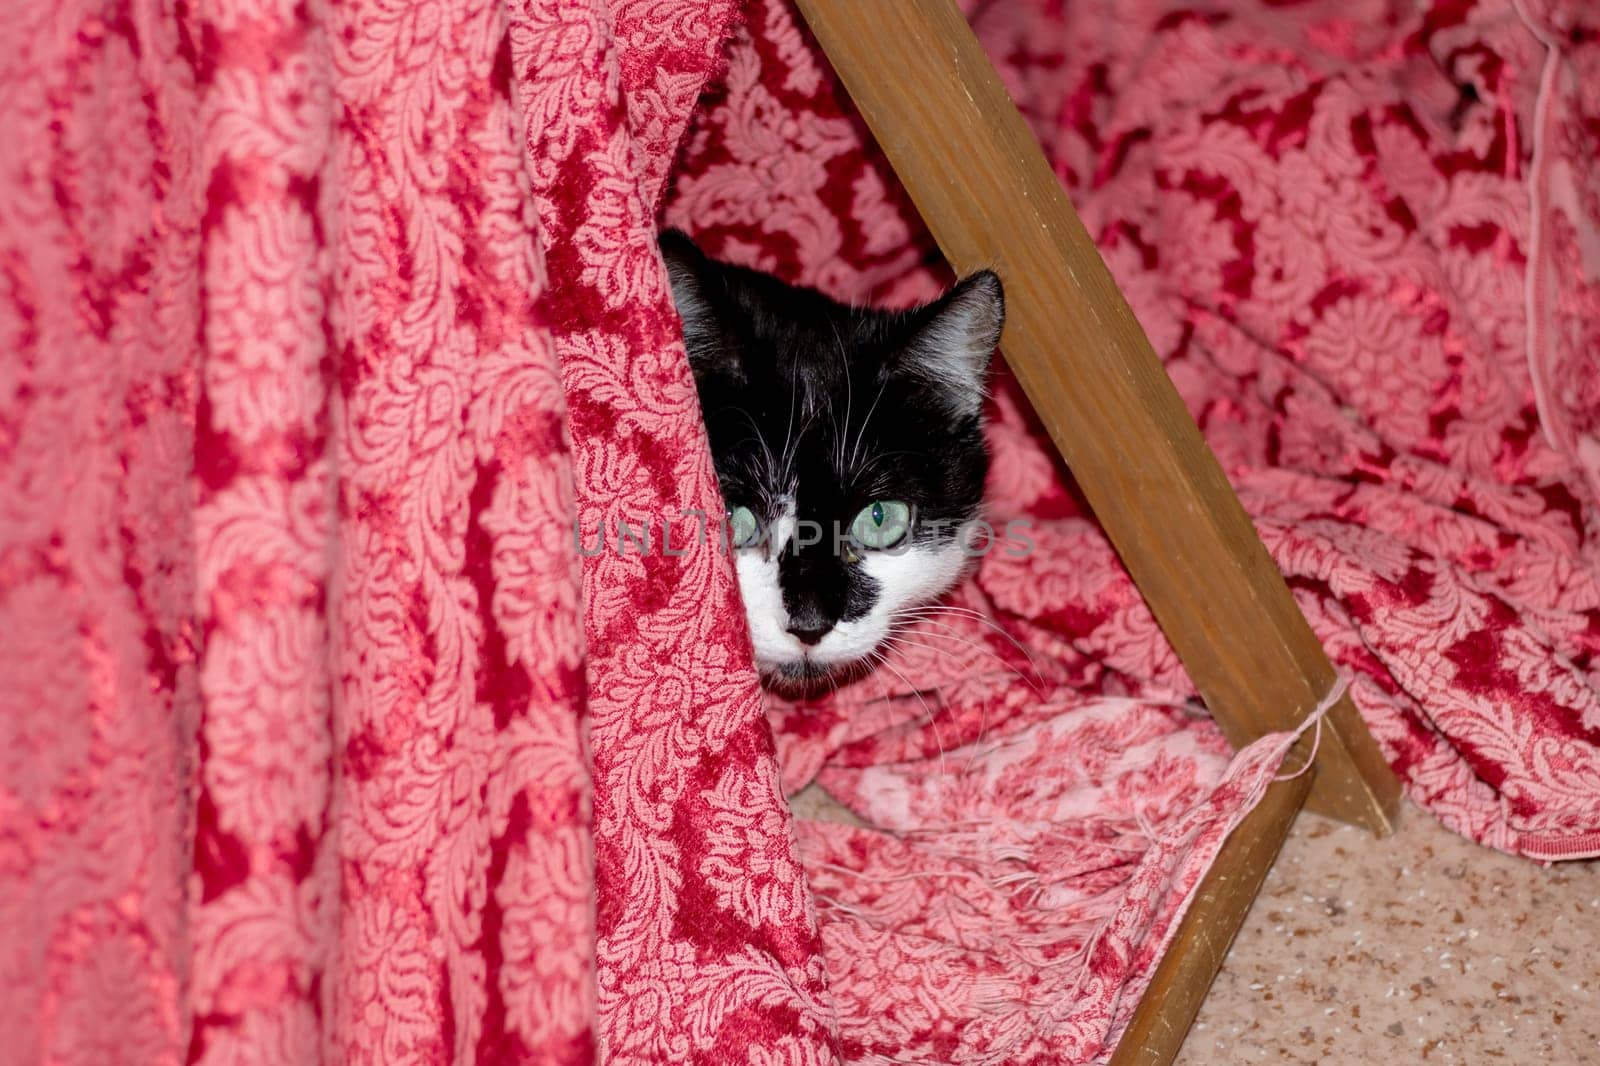 A Felidae carnivore with black and white fur is concealed under a pink blanket. Its whiskers twitch as it hides in the fawn wood, peeking out with a curious snout